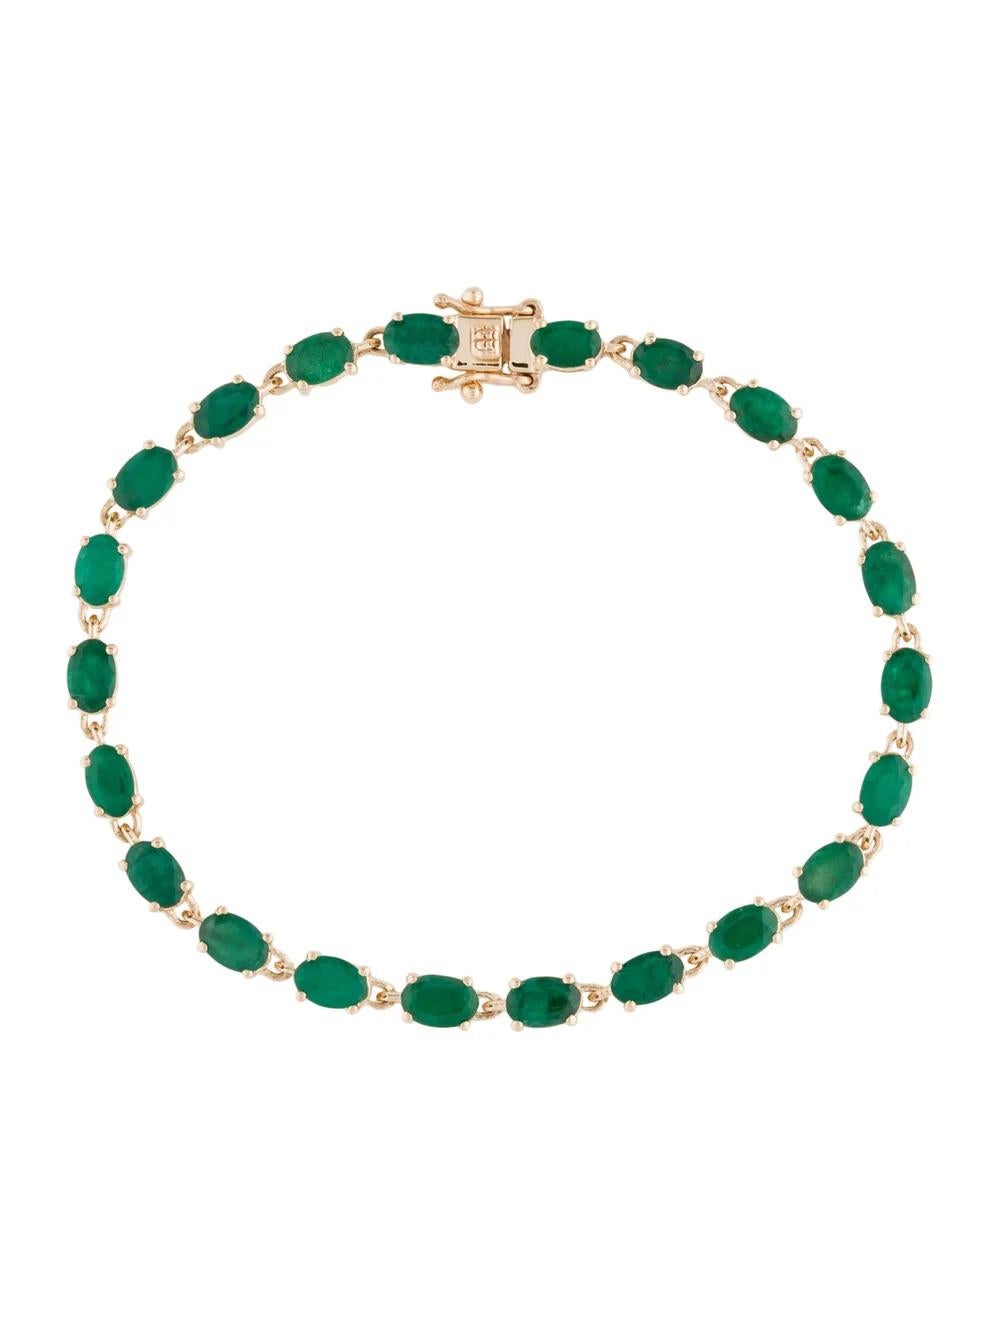 Introducing an exquisite piece of fine jewelry: the 14K Yellow Gold Emerald Tennis Bracelet, a stunning accessory that exudes elegance and sophistication.

Specifications:

* Metal: 14K Yellow Gold
* Inside Circumference: 7.25